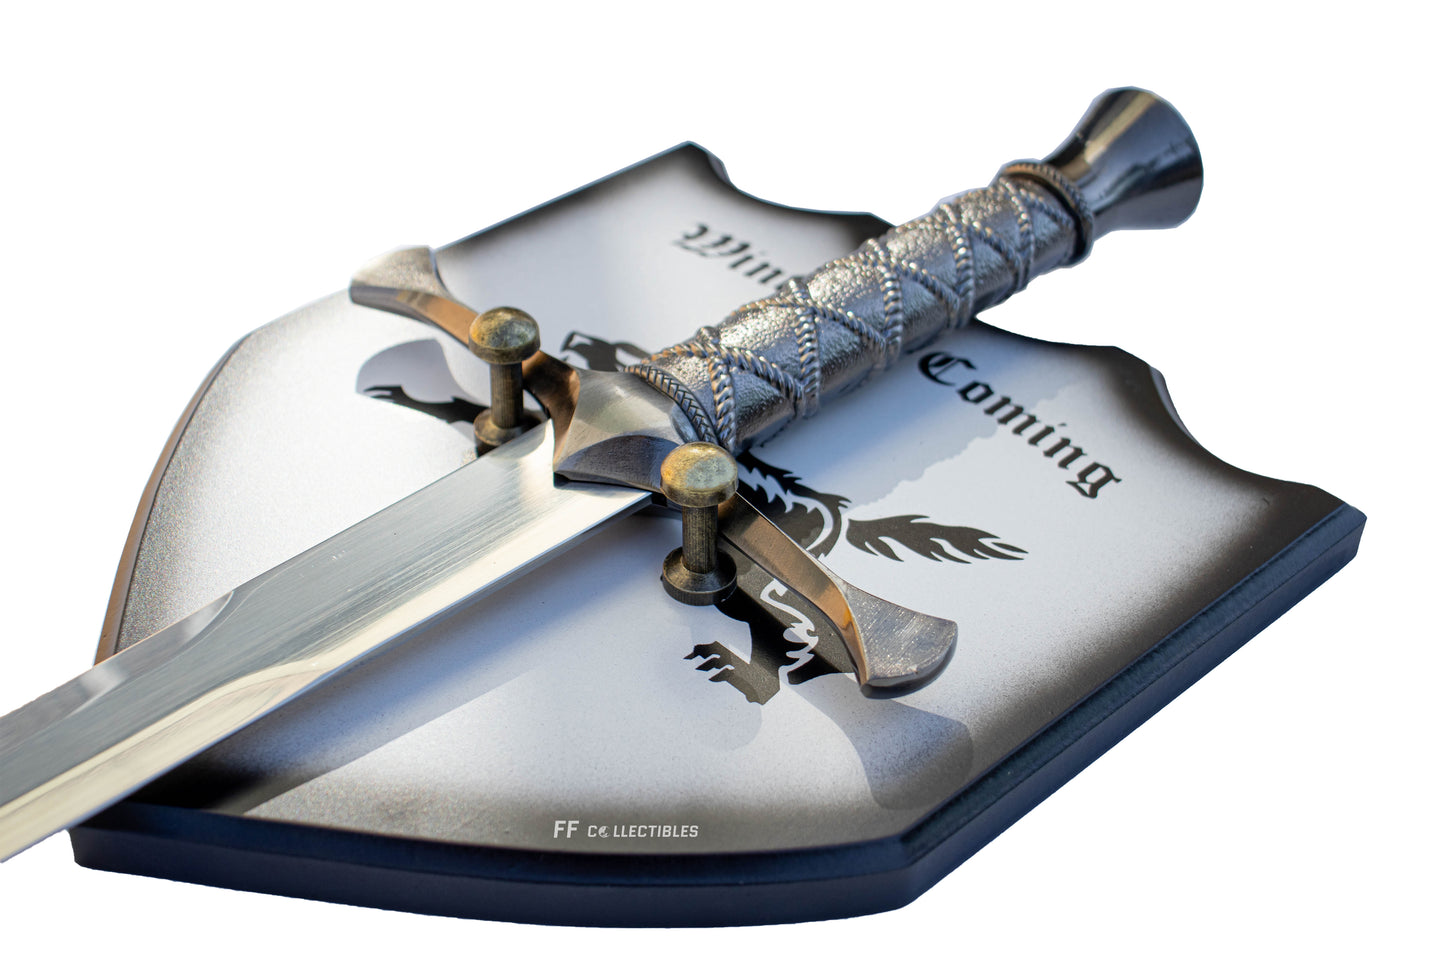 GAME OF THRONES - NEEDLE (BOOK), ARYA STARK'S SWORD (with FREE wall plaque)